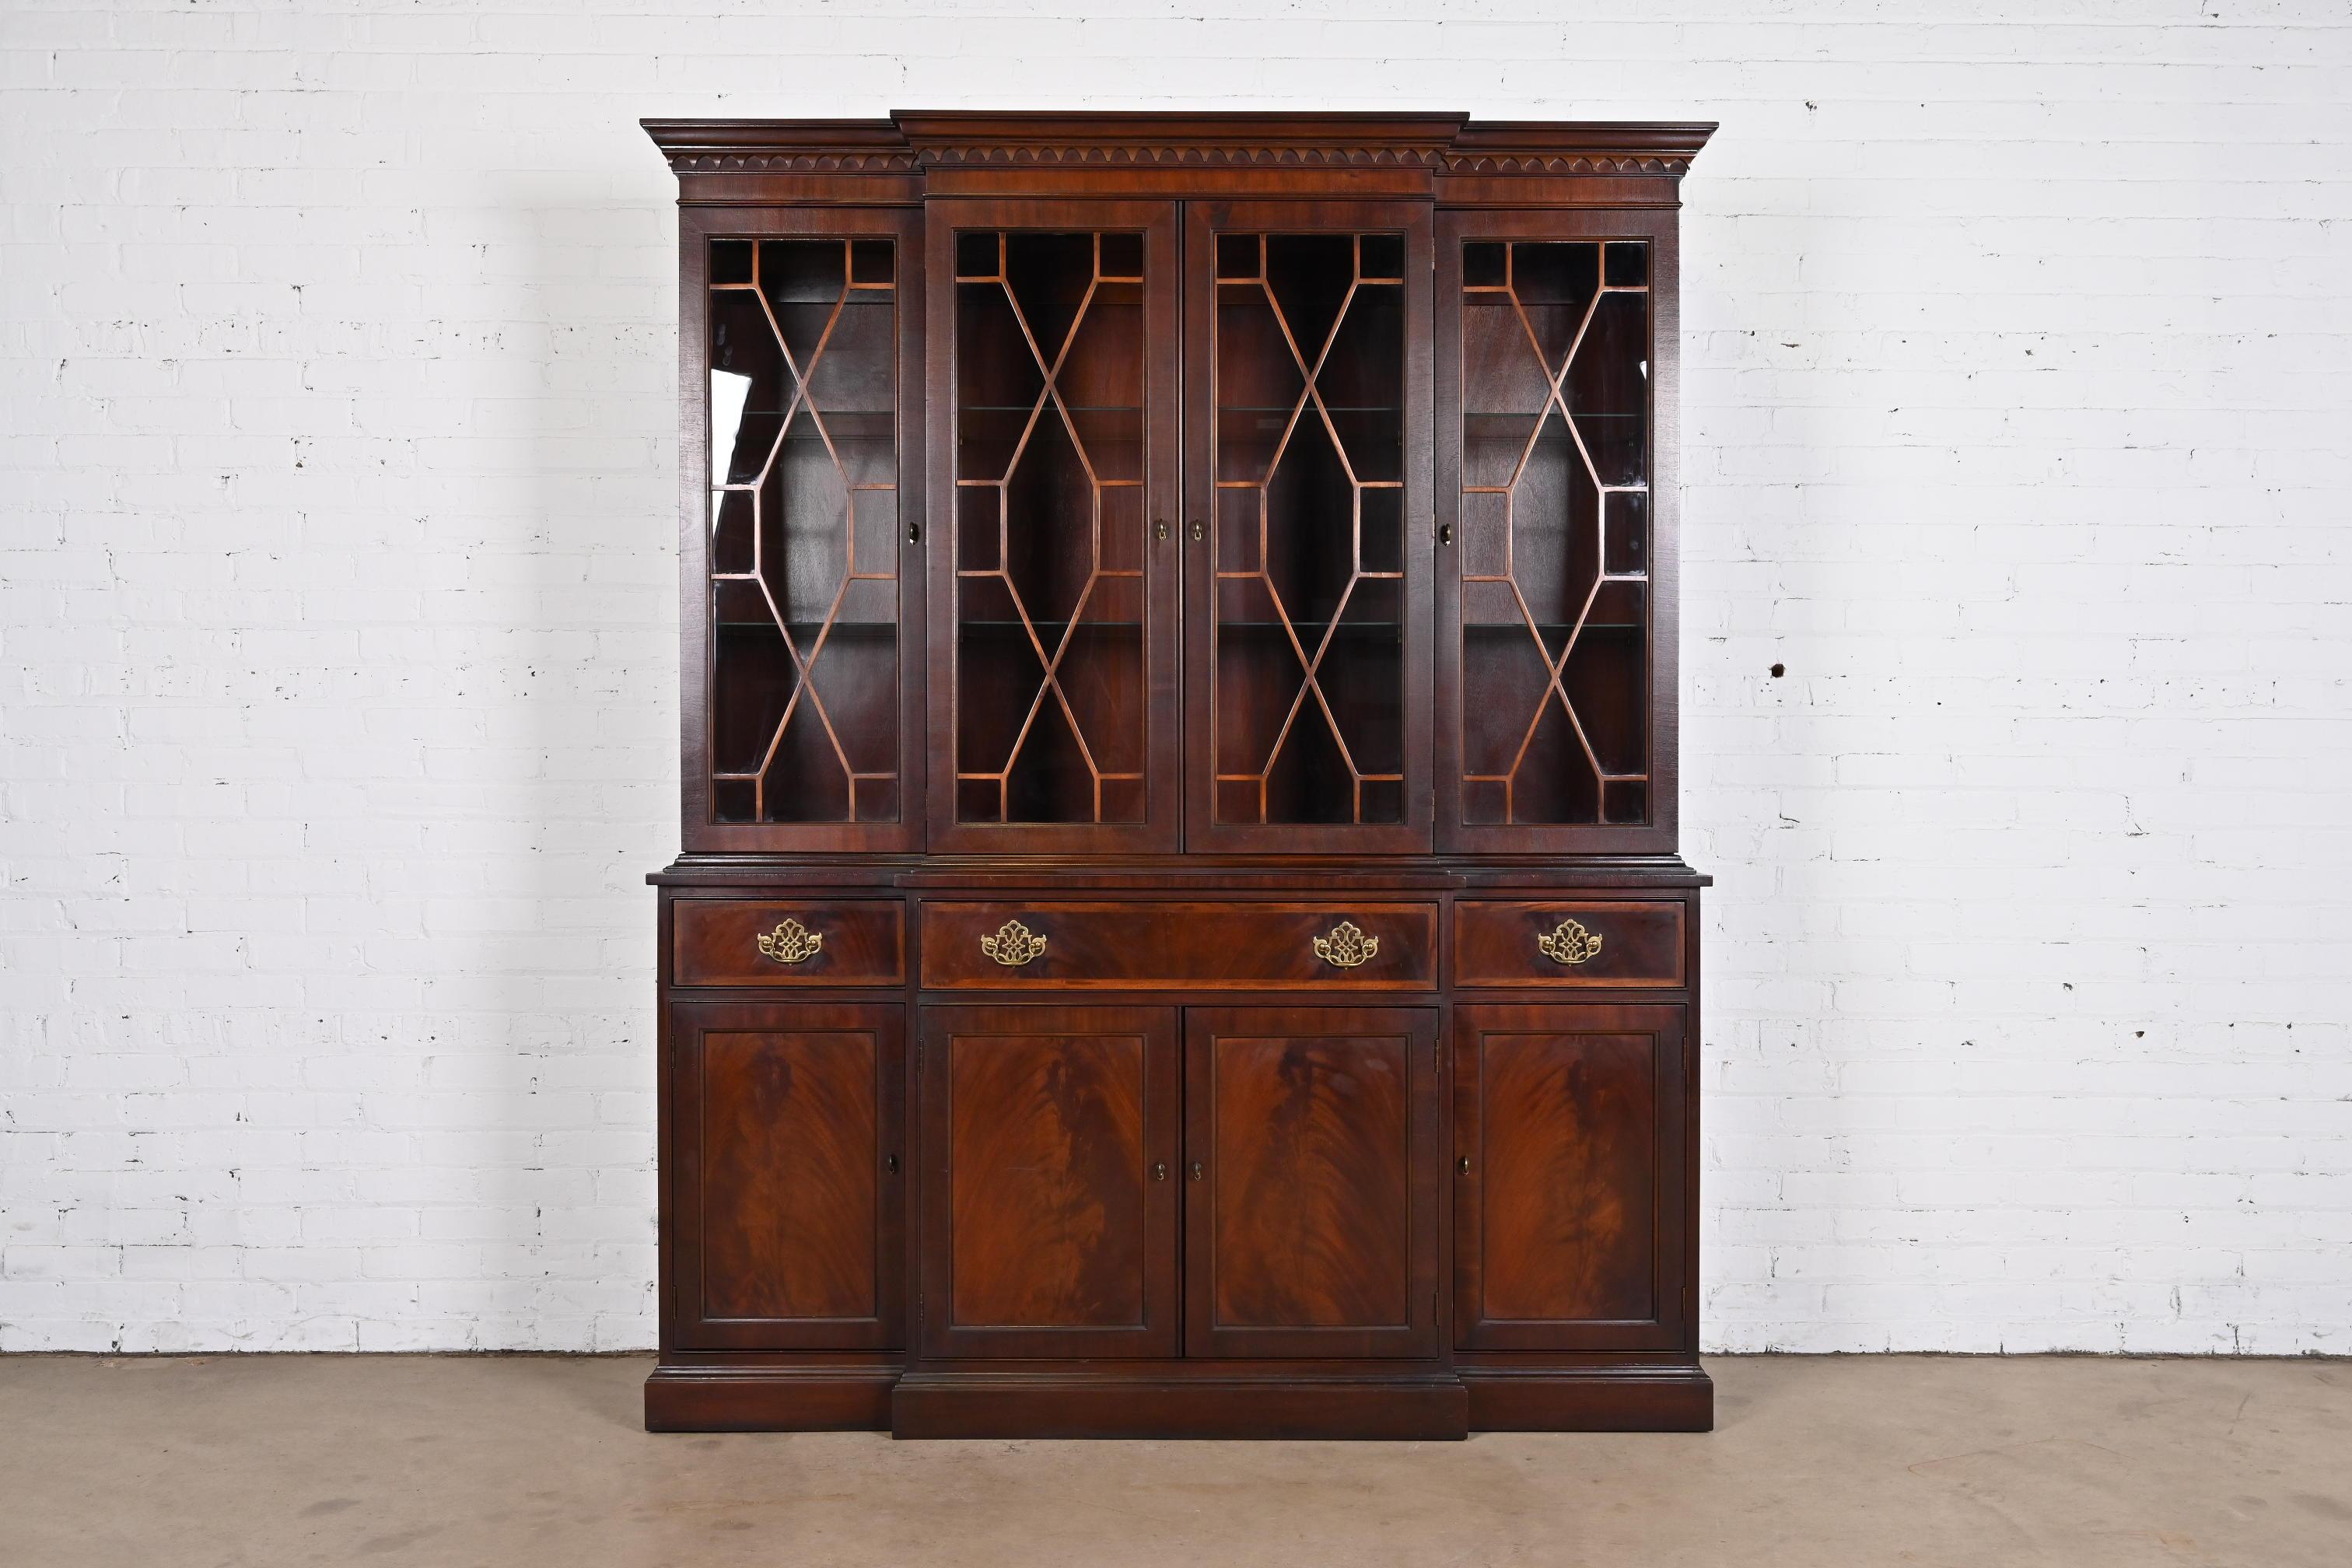 A gorgeous Georgian or Chippendale style lighted breakfront bookcase or dining cabinet

By Hickory Furniture, 